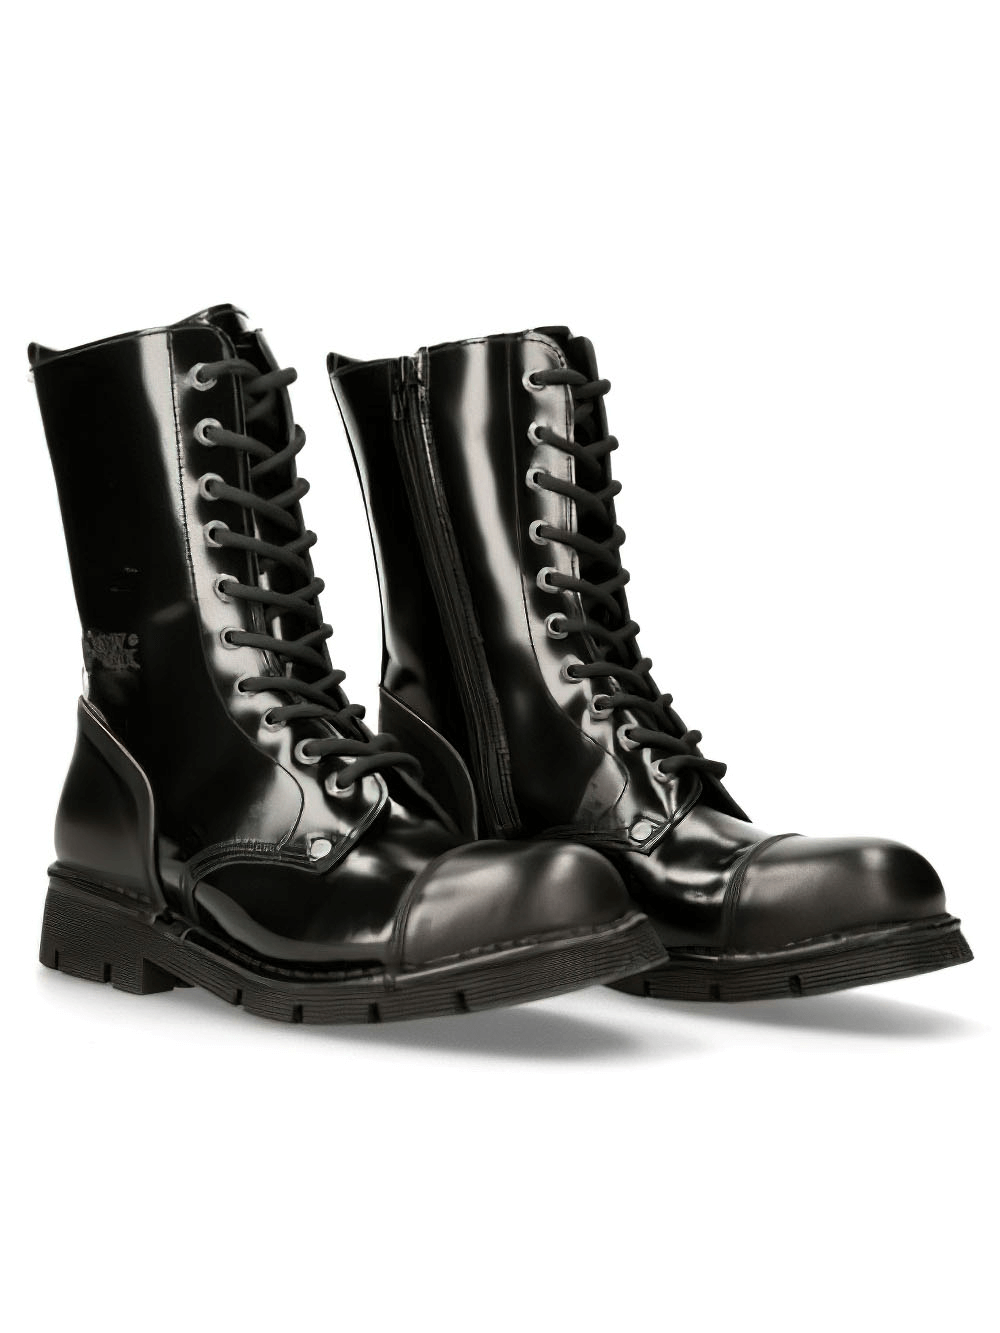 NEW ROCK Black Lace-Up Military Style Ankle Boots